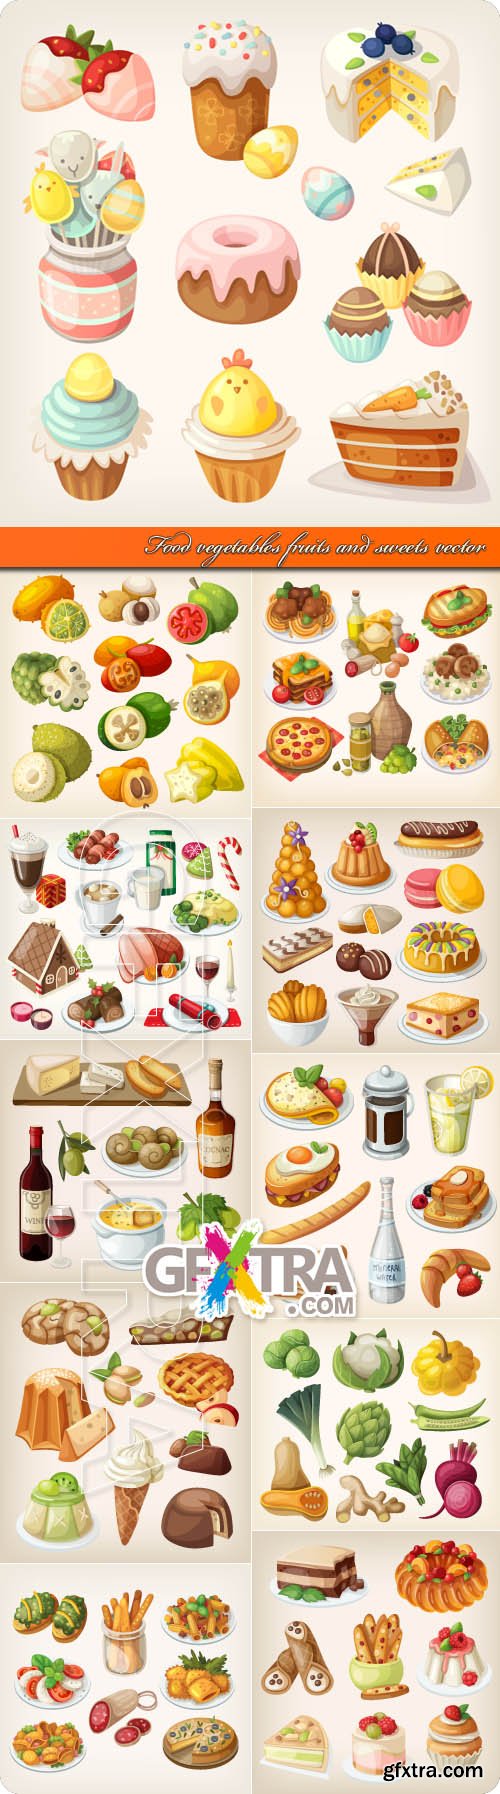 Food vegetables fruits and sweets vector